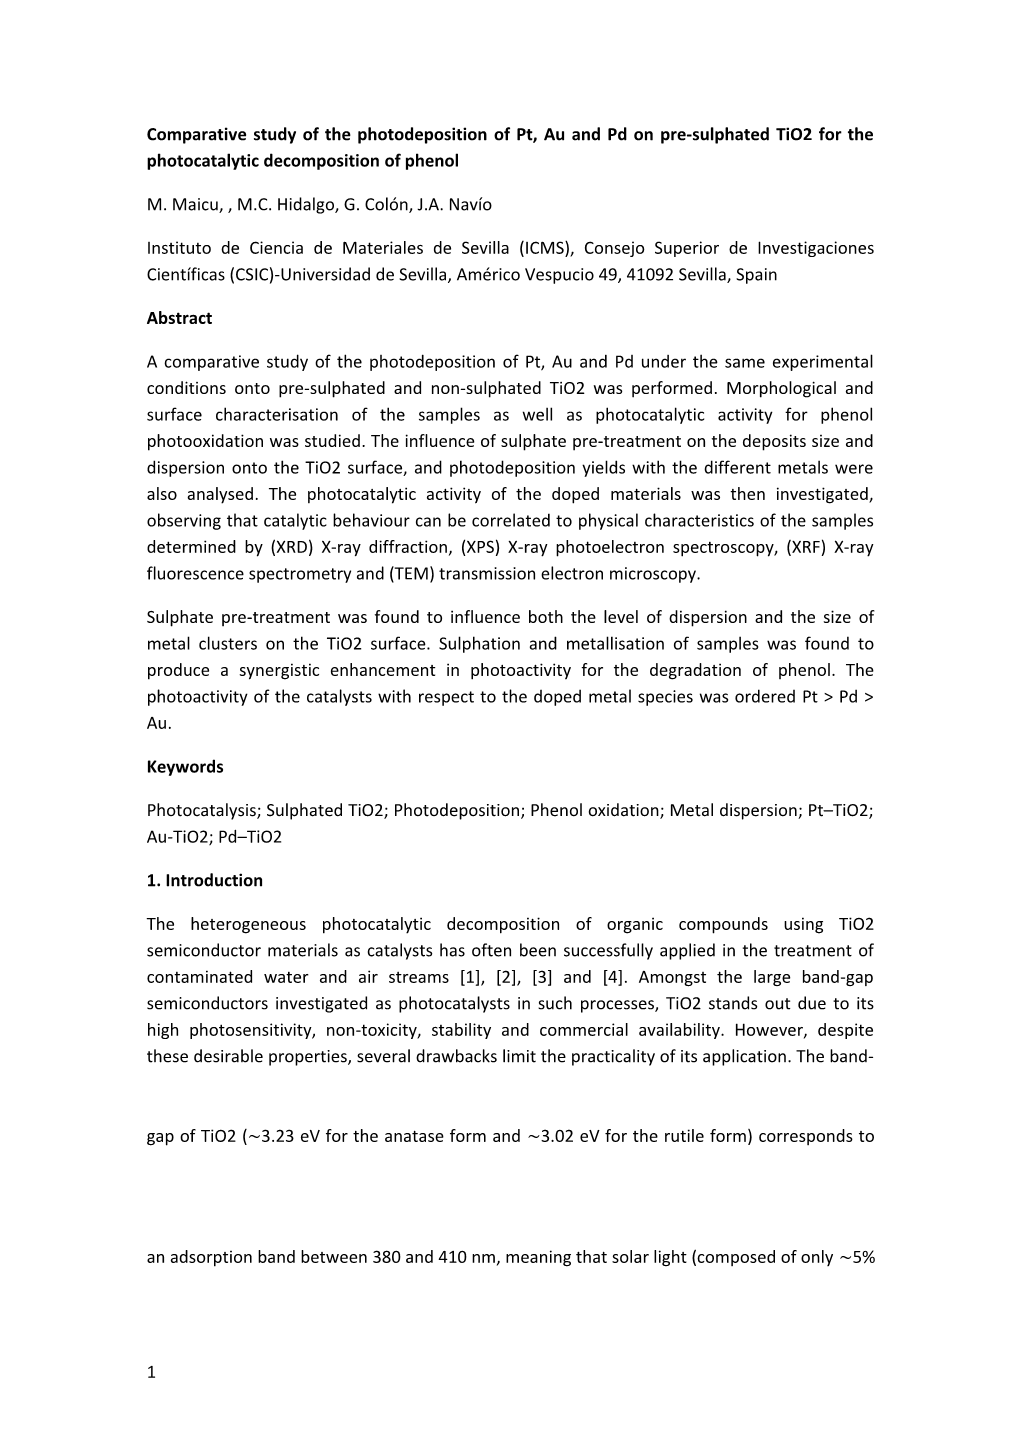 Comparative Study of the Photodeposition of Pt, Au and Pd on Pre-Sulphated Tio2 for The